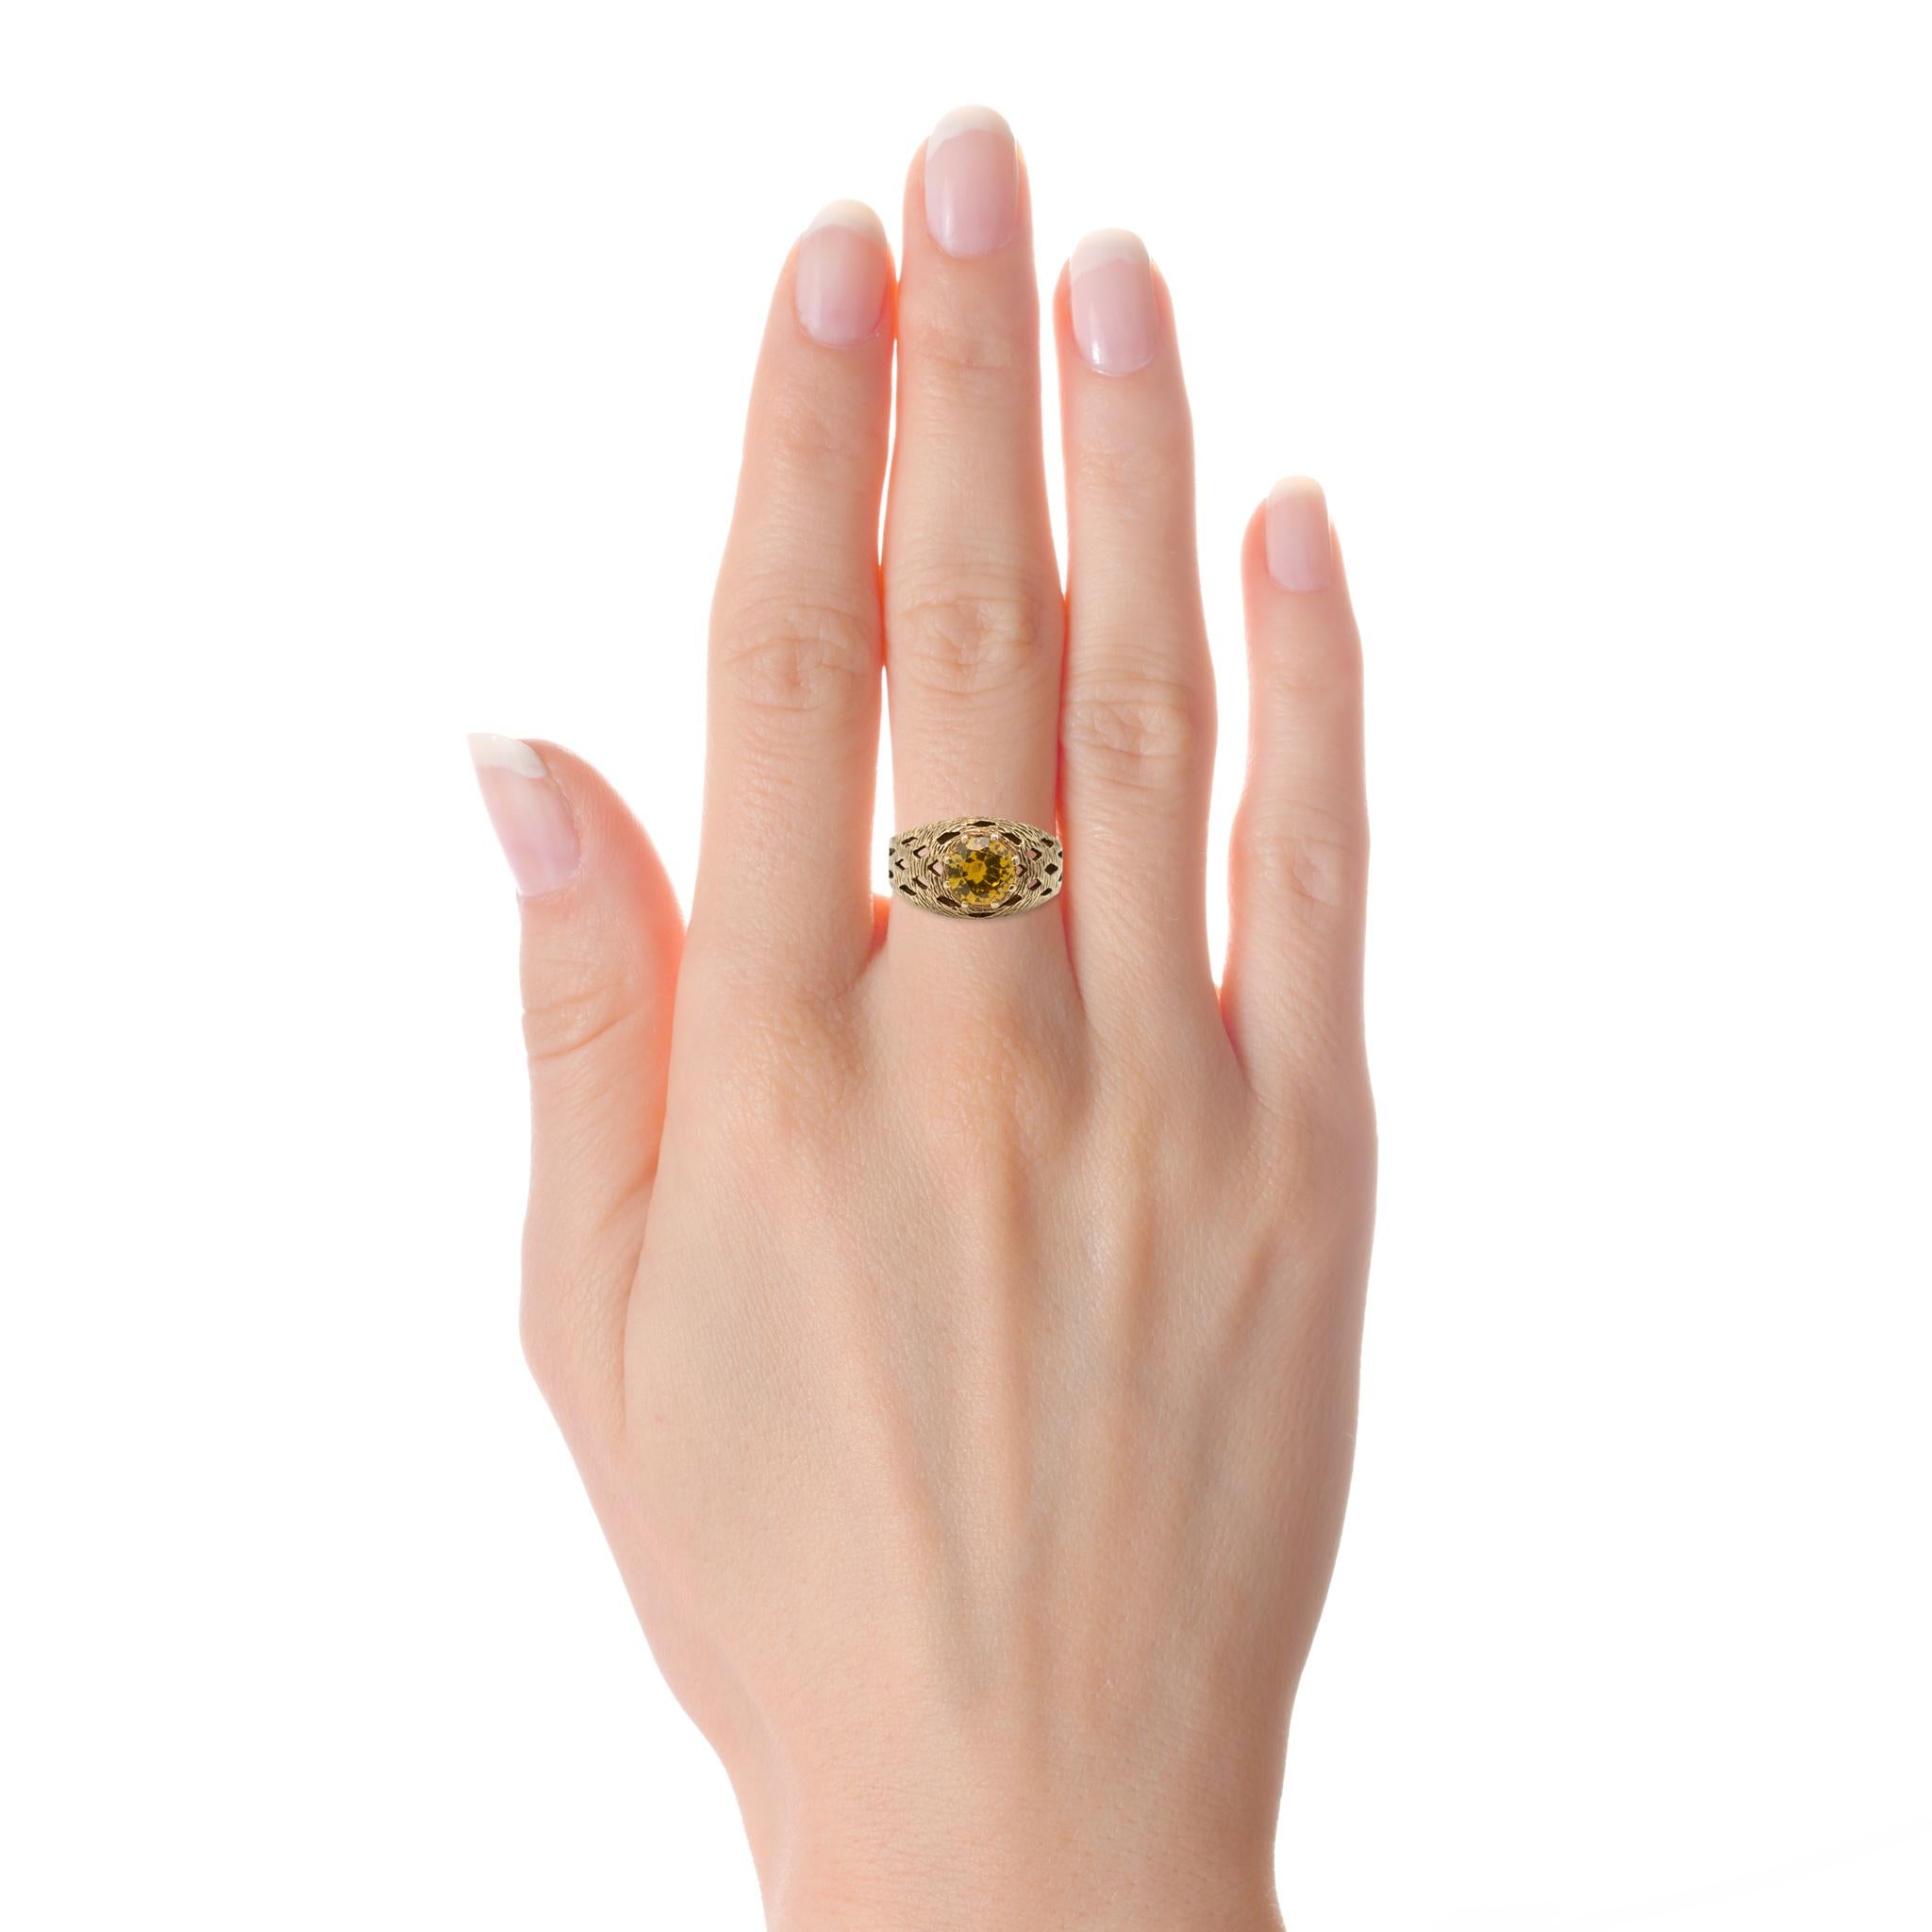 Vintage 19780s Chunky Citrine Solitaire Ring 9 Karat Gold Hallmark Dated 1974 For Sale 3